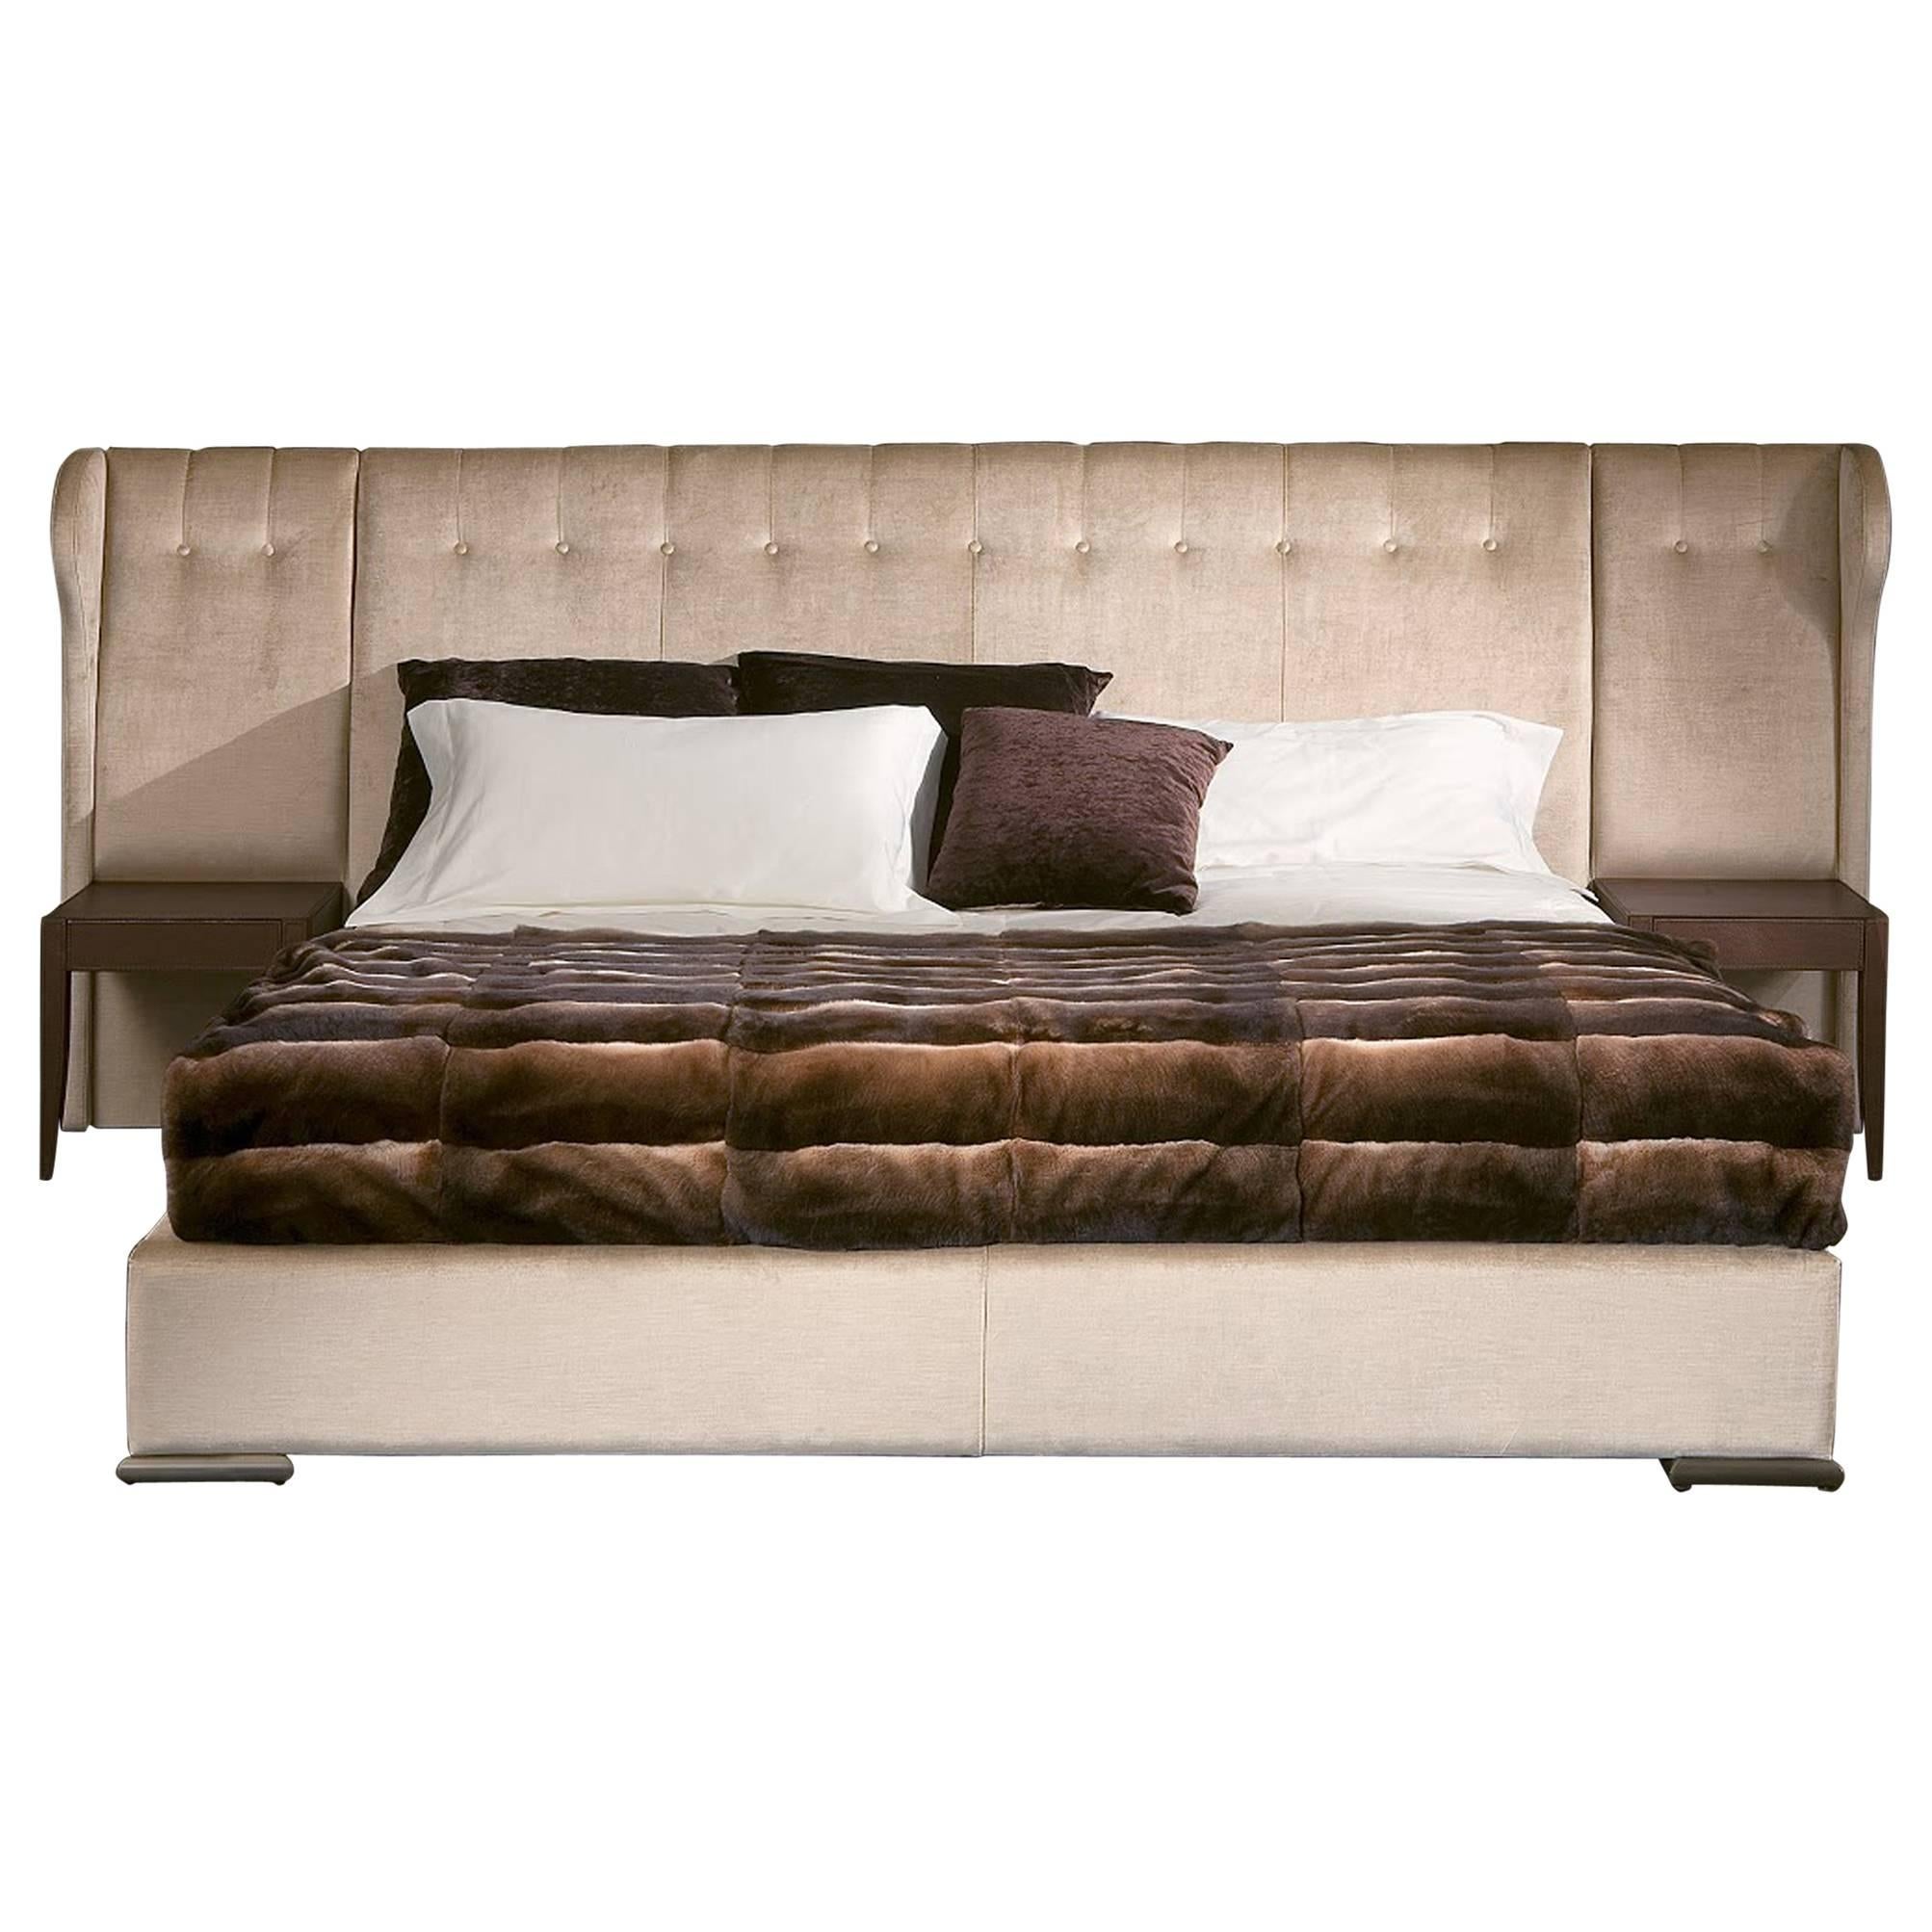 Parma Bed with High Quality Fabric and Night Table Finishing Leather For Sale